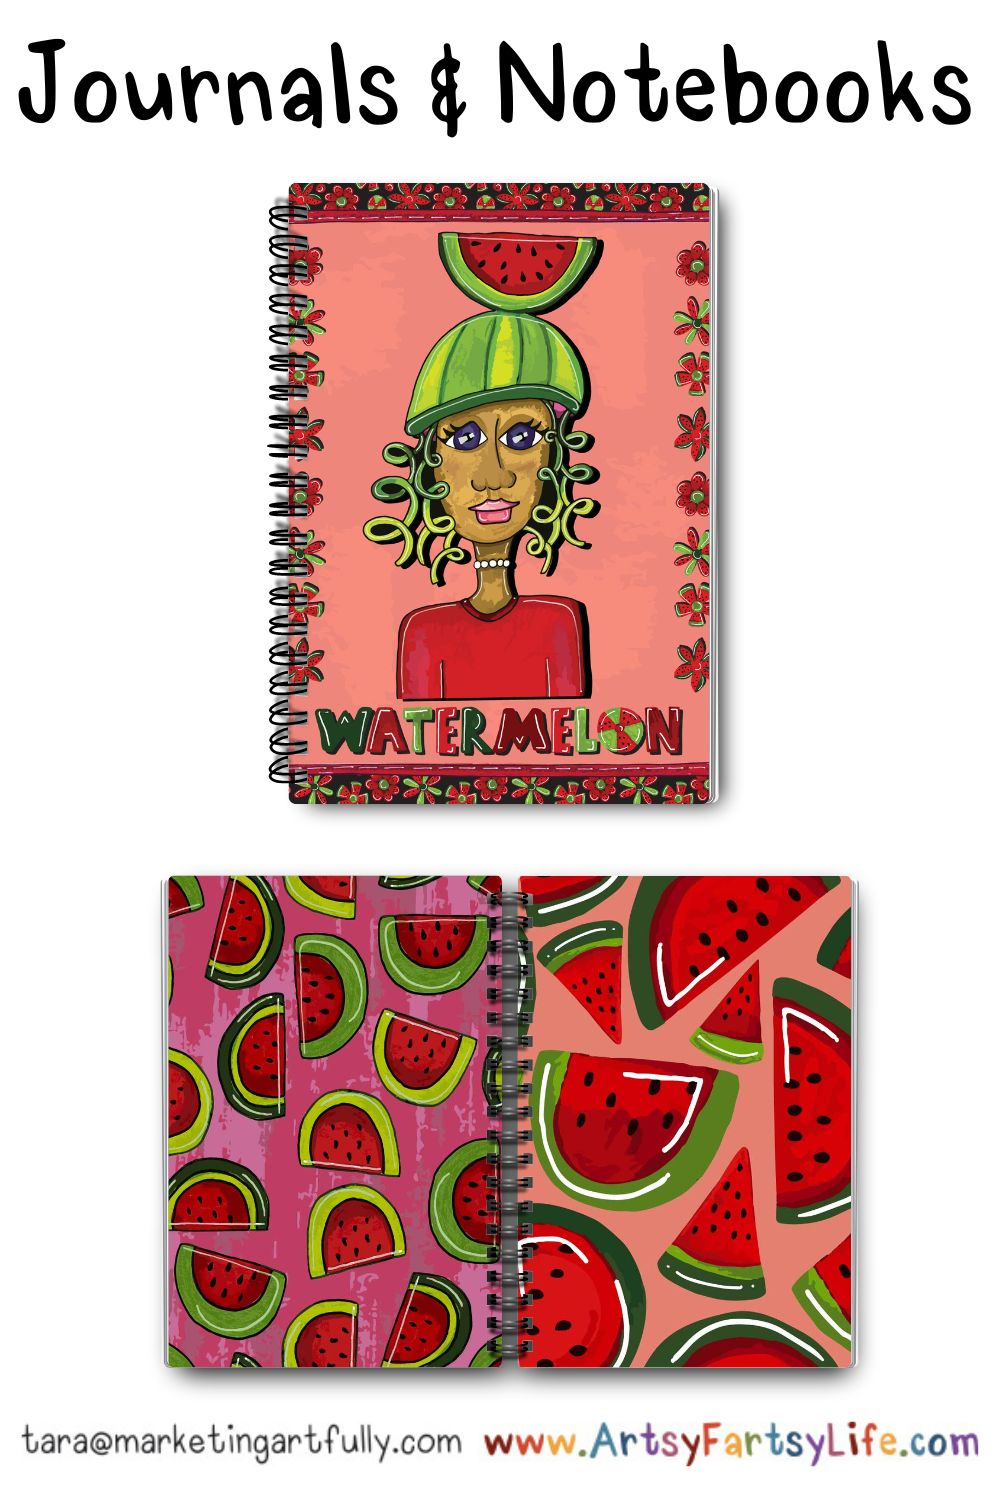 Watermelon Woman Surface Design For Journals and Notebooks